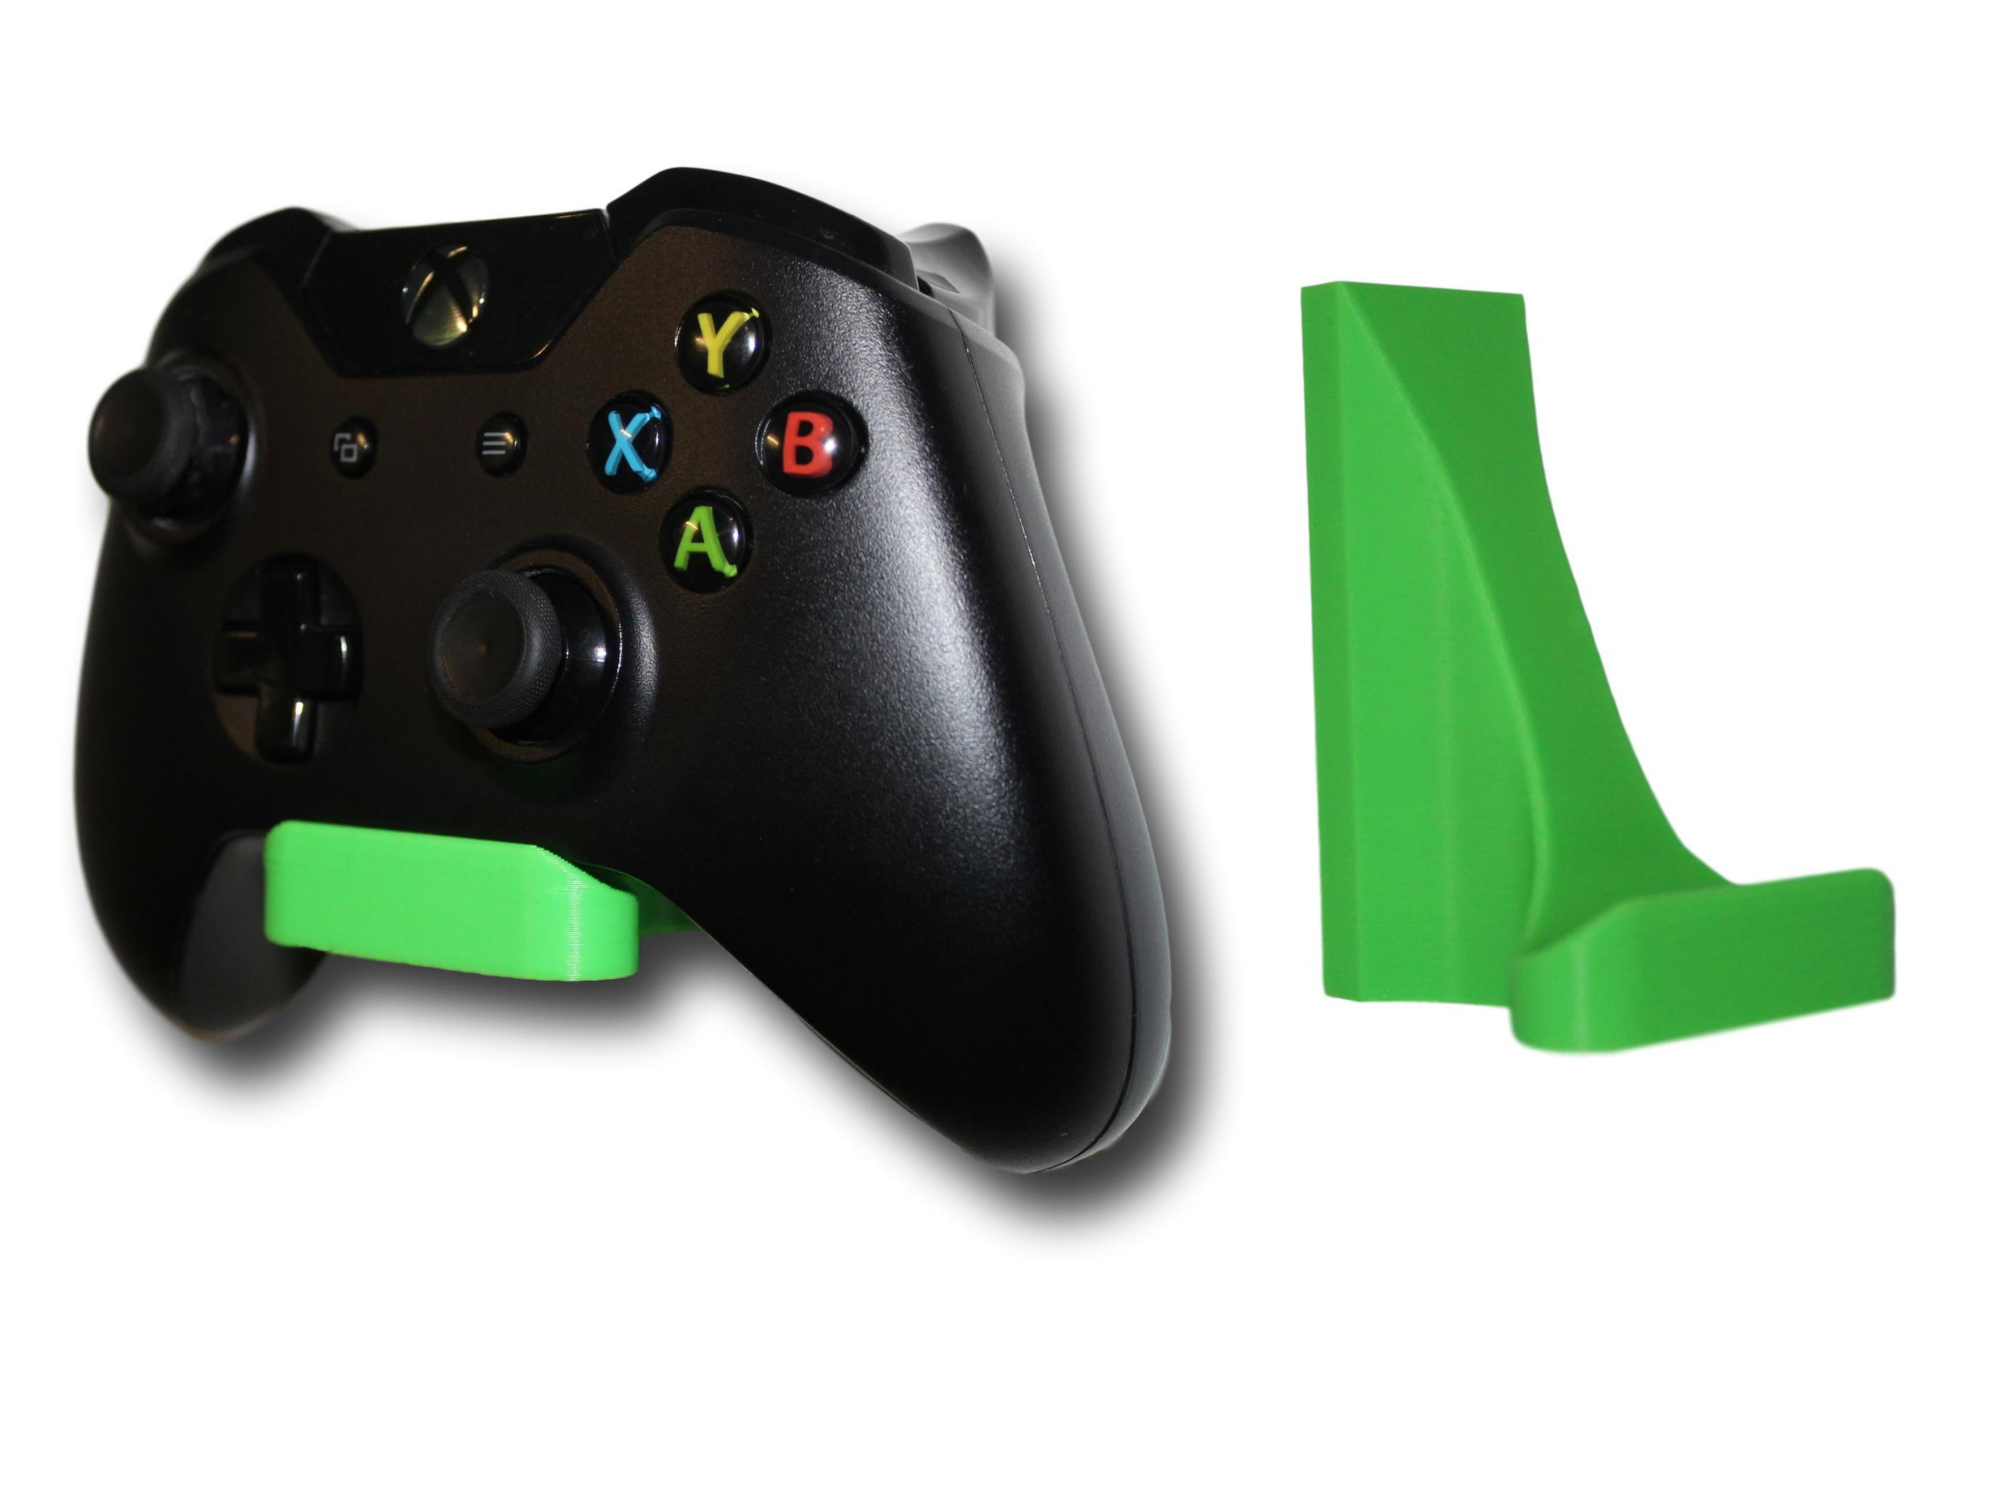 Controller Display for XBOX ONE & Series X, Series S | Organize | Damage-Free | 3D Lasers Lab